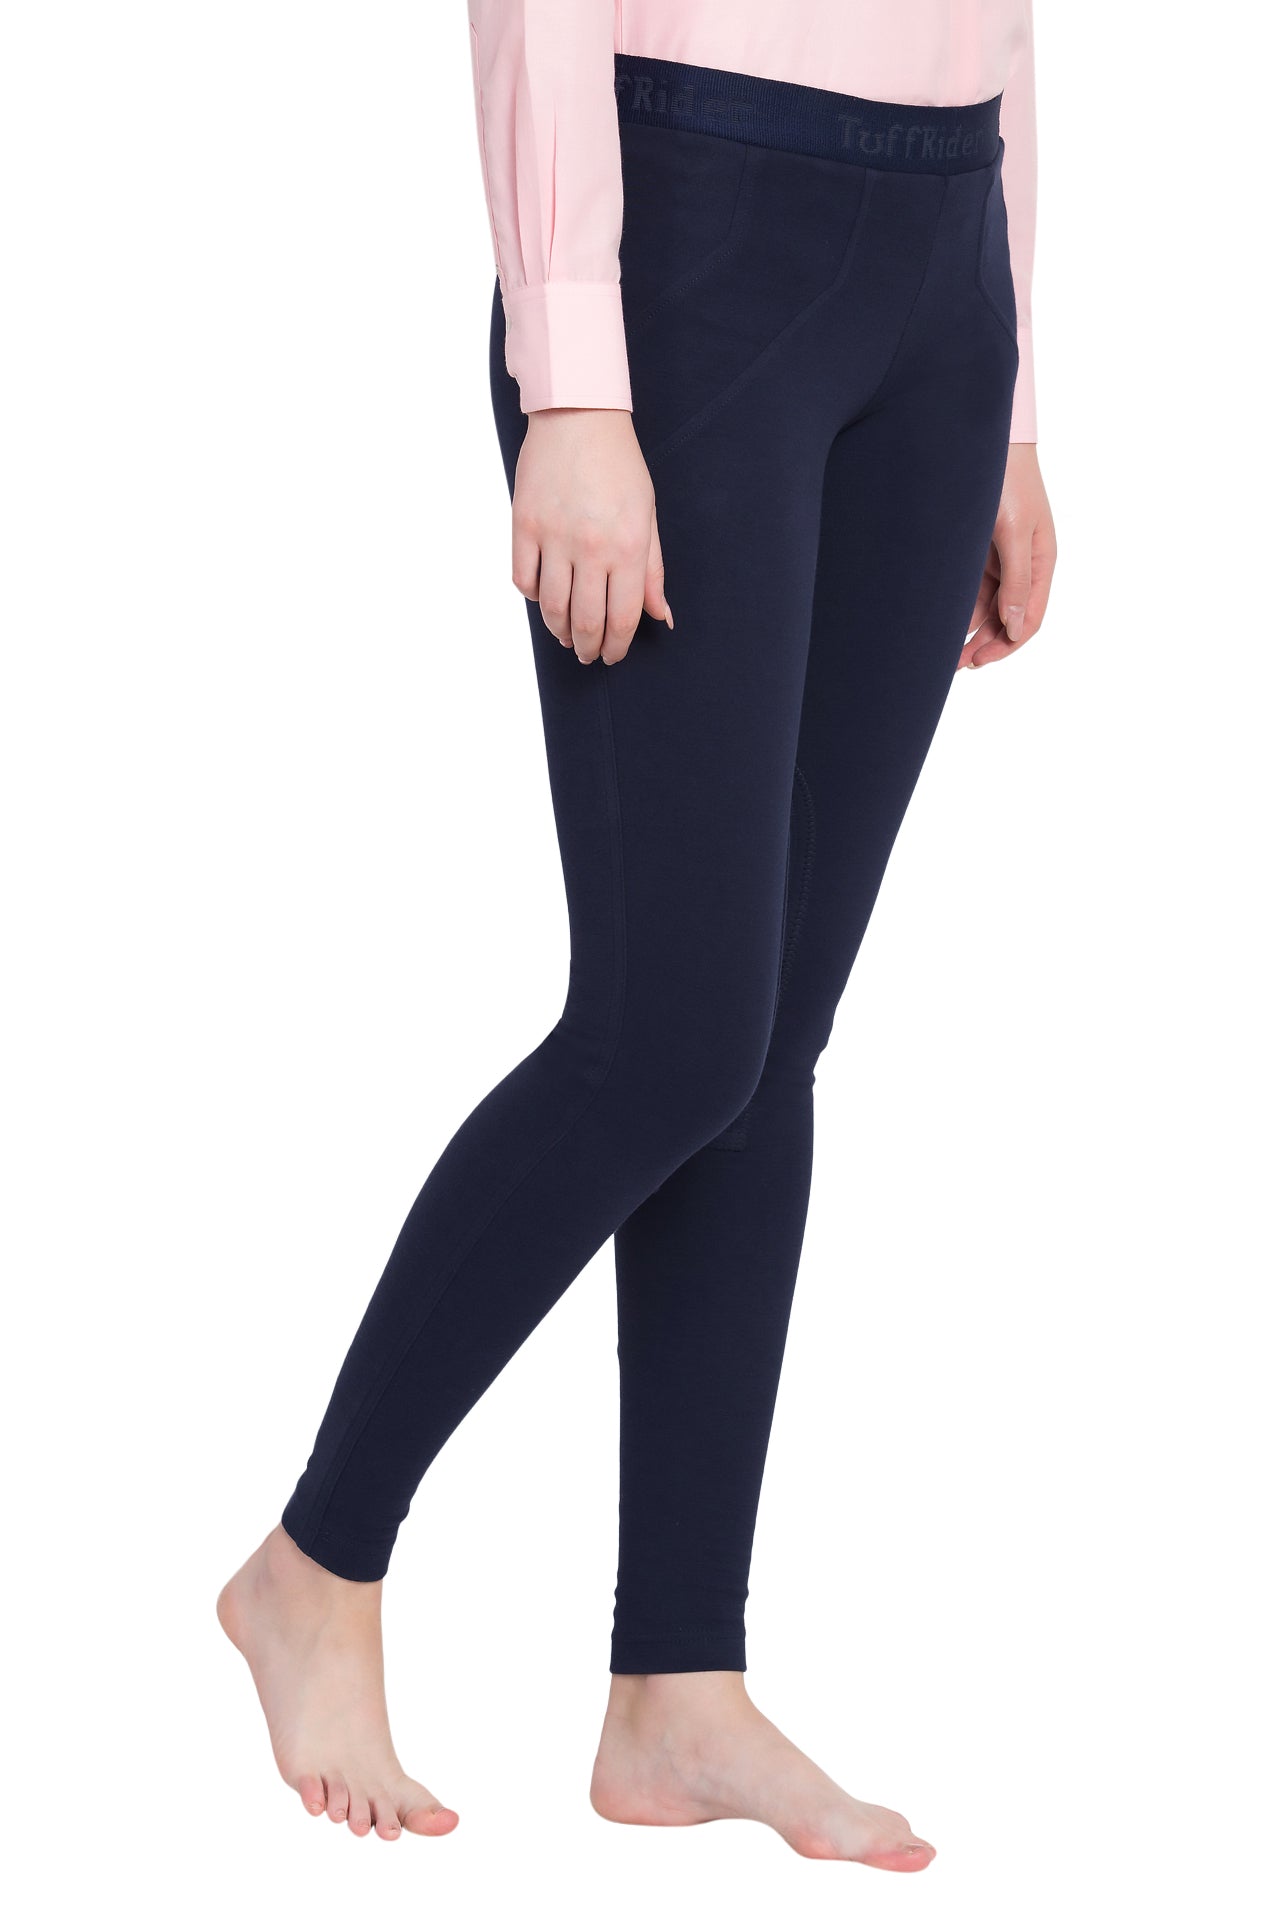 GS Equestrian Ladies Unity Full Seat Riding Tights